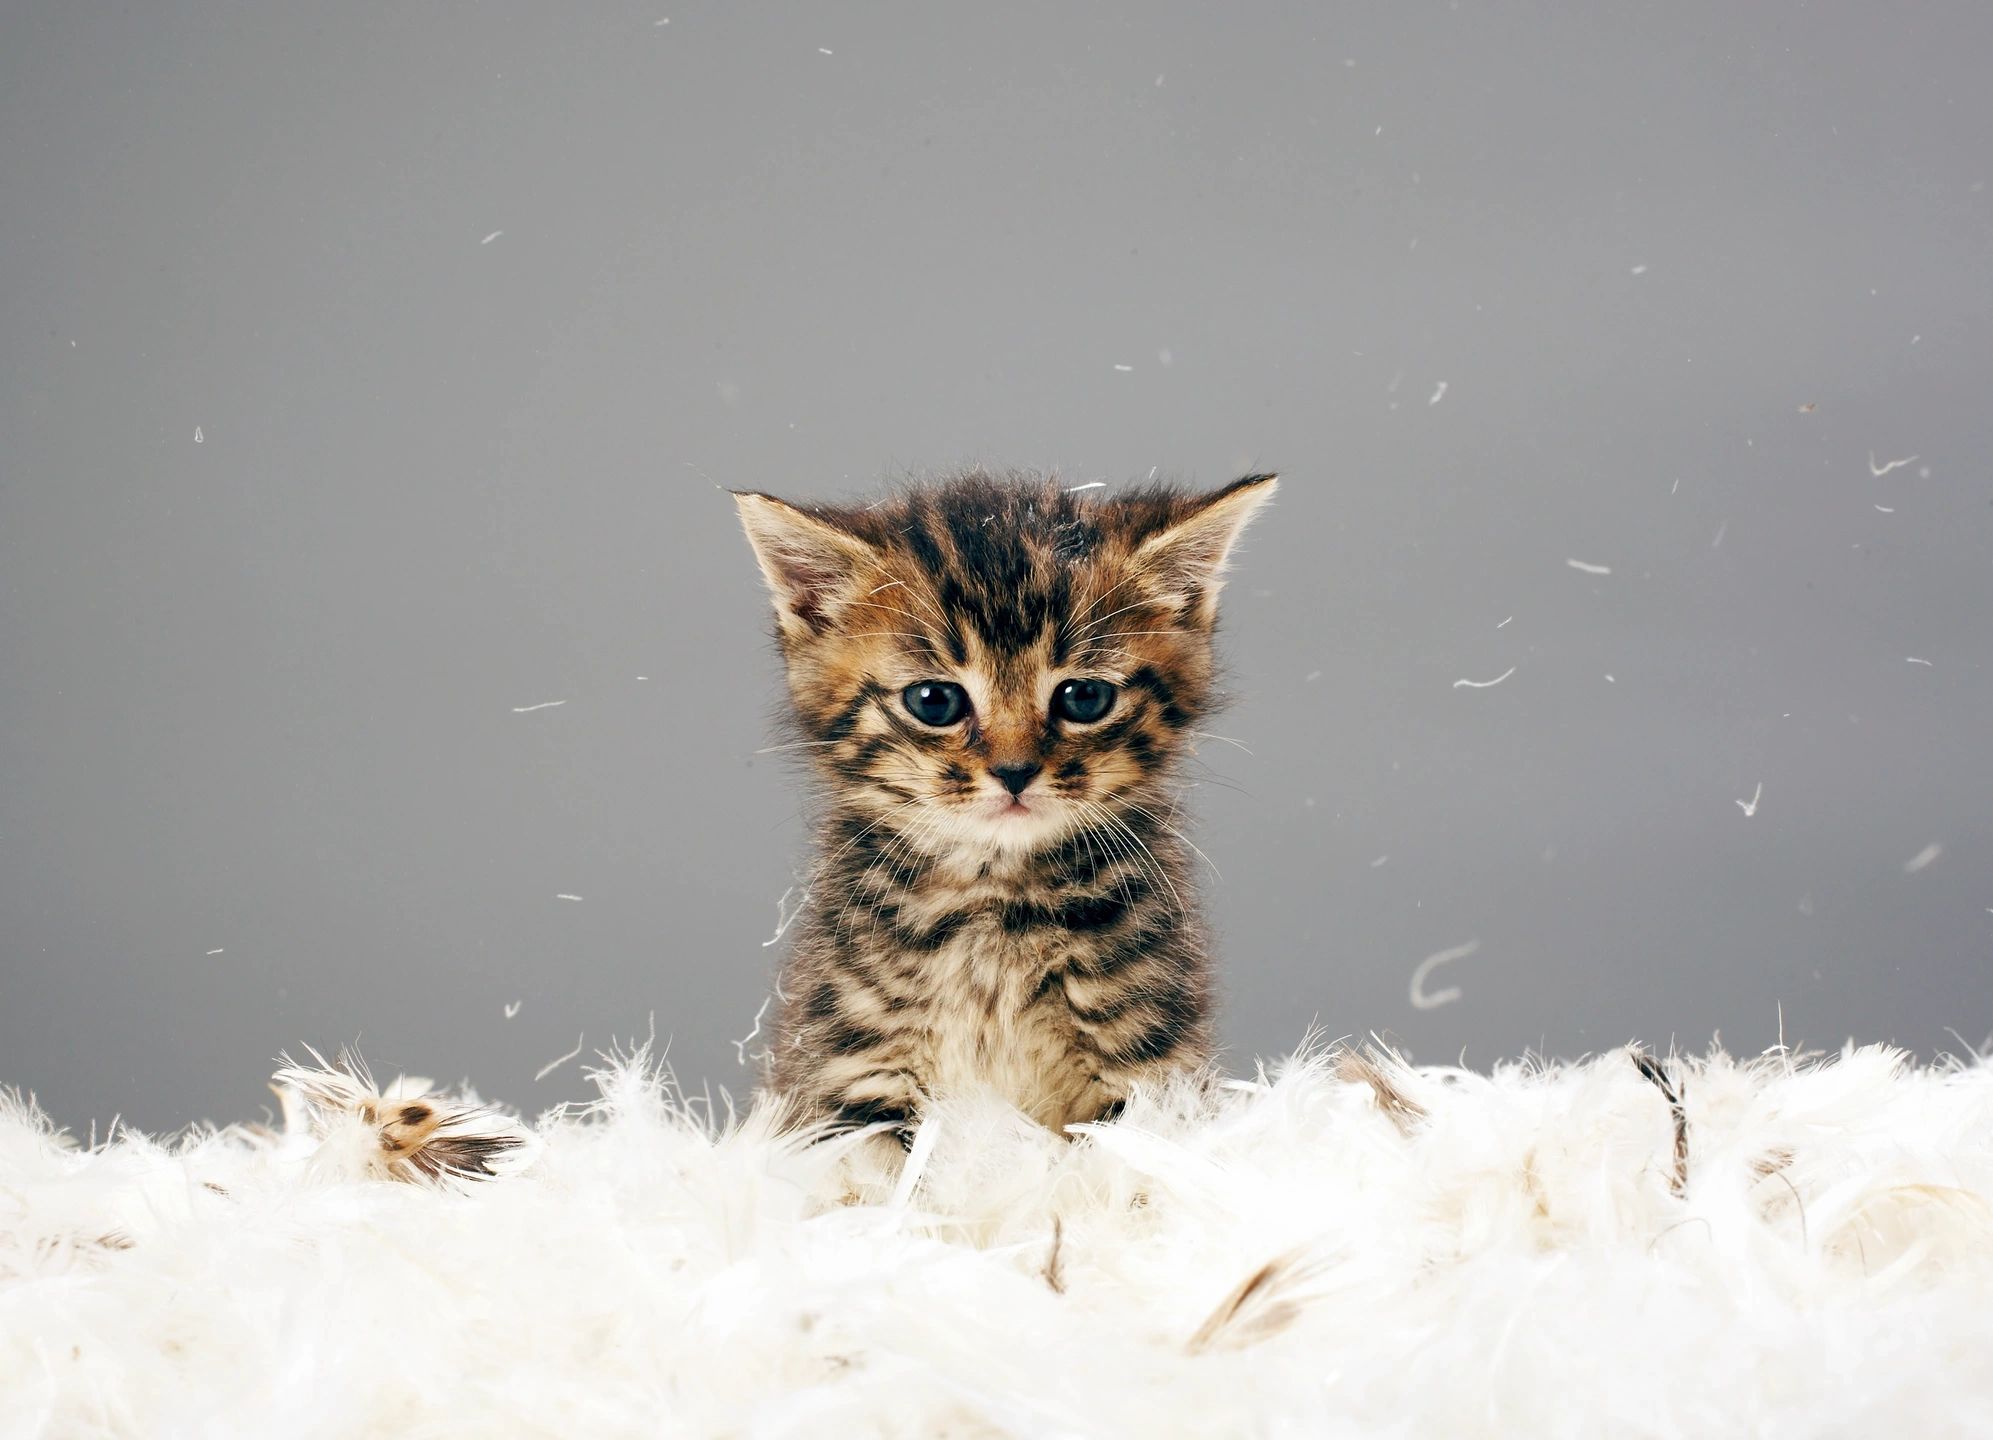 Purr-fectly Festive: How Do Cats, Kittens & Rodents Celebrate Winters?